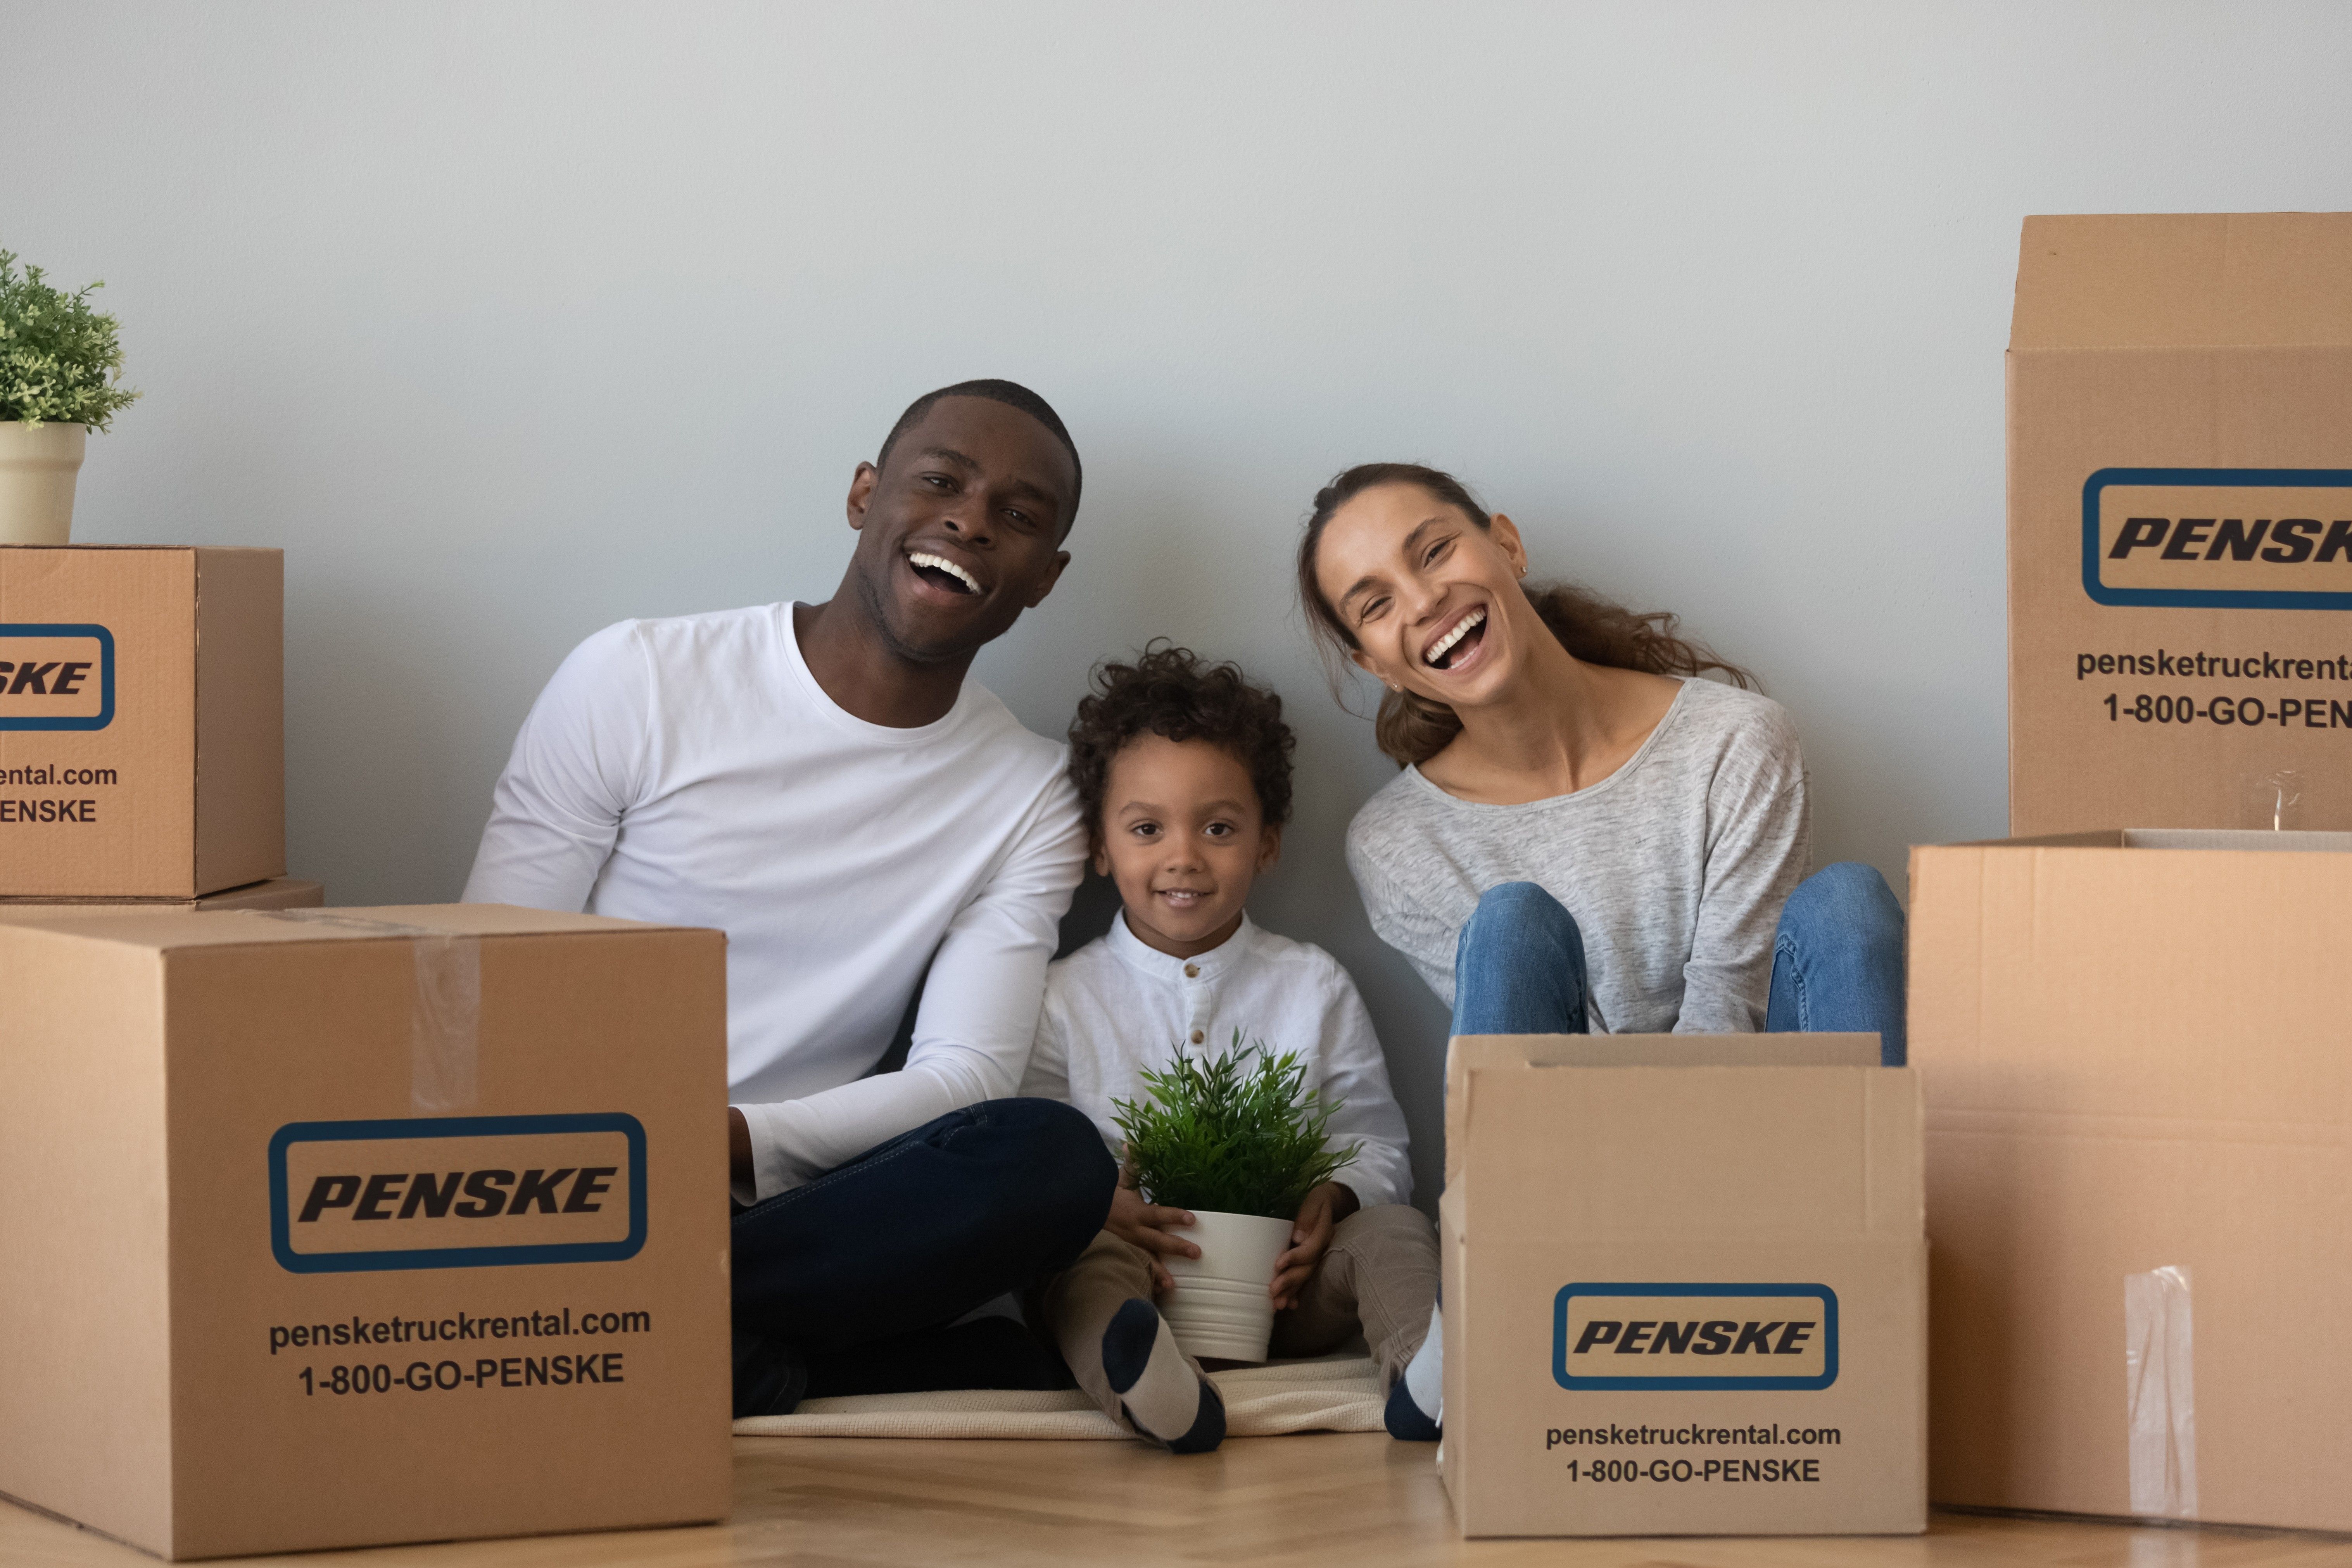 A woman, man and child sit among boxes ready to move.